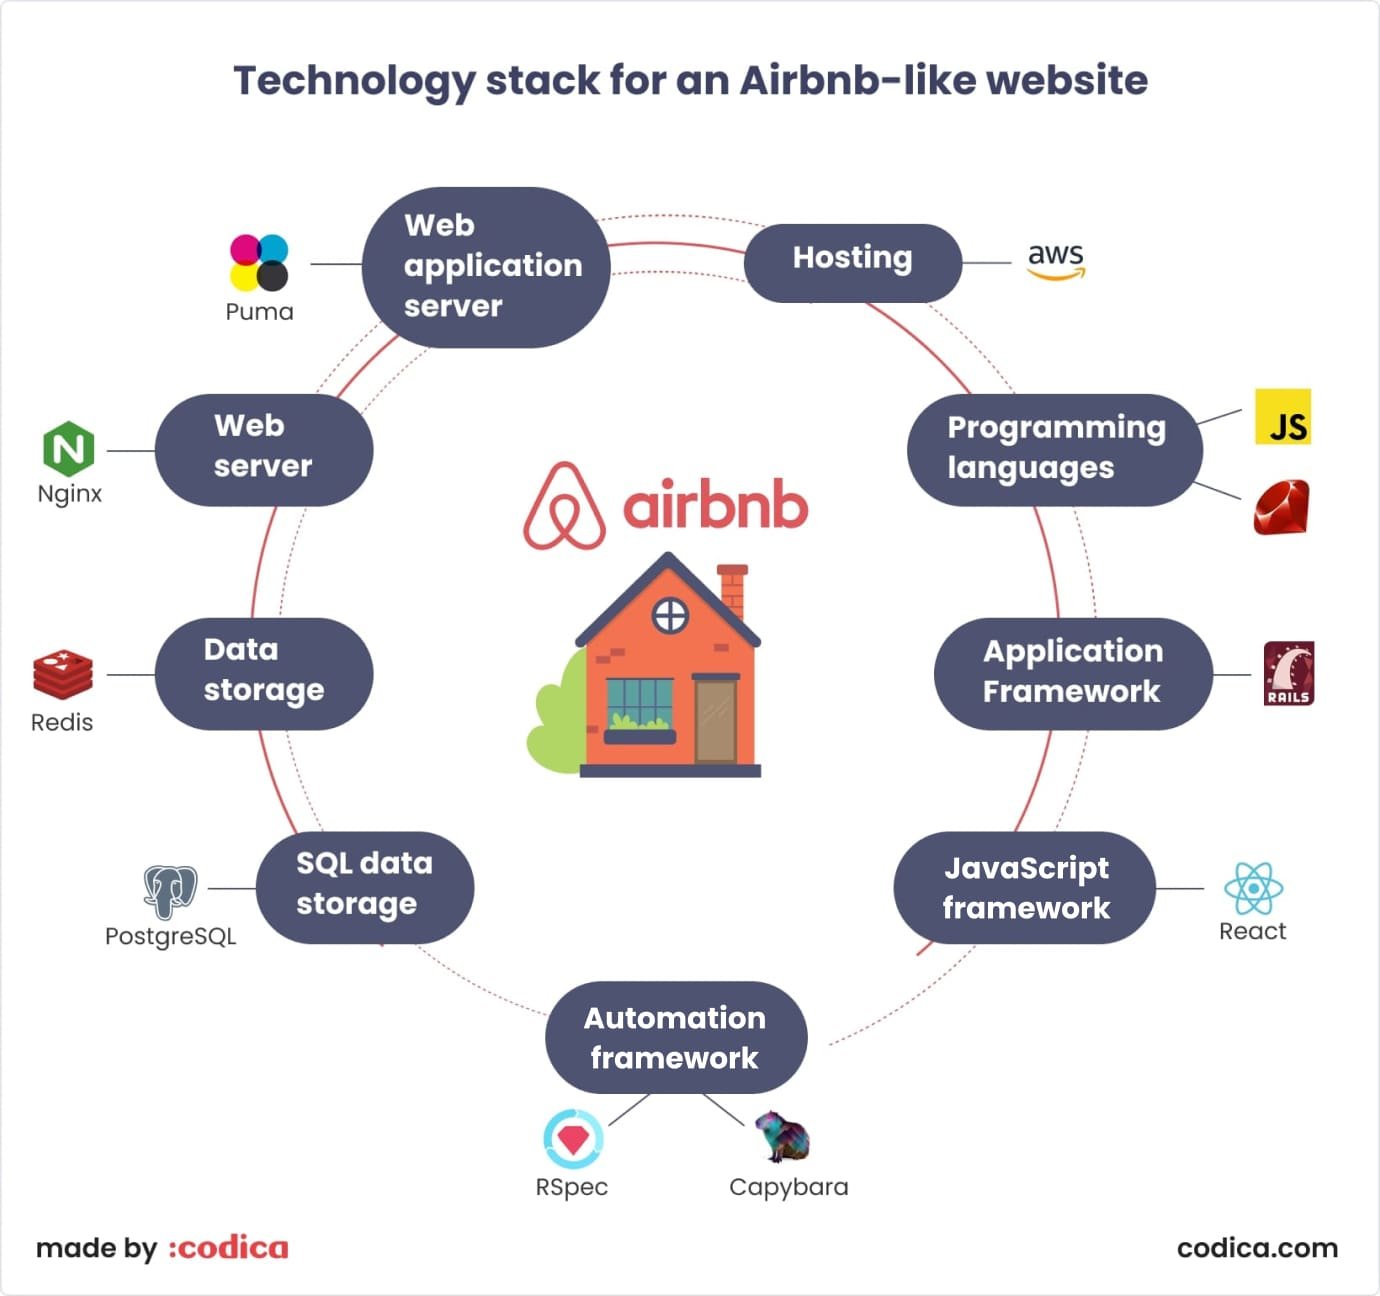 Airbnb tech stack